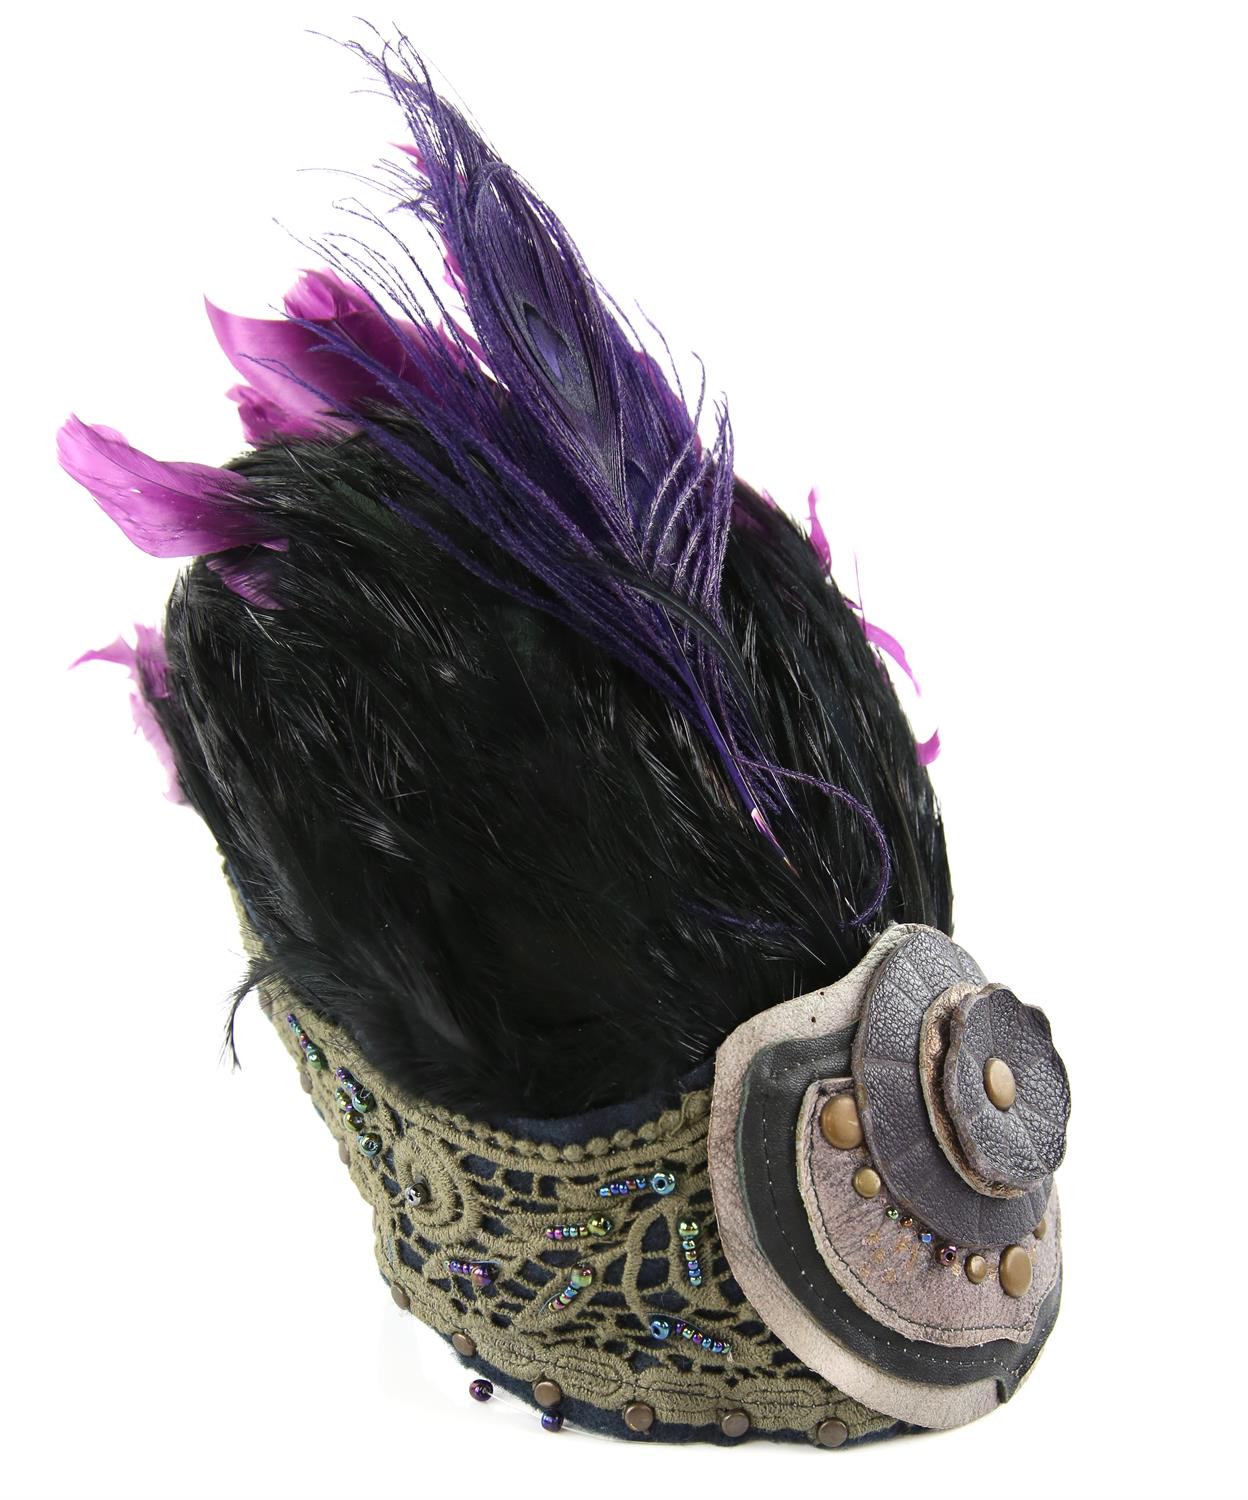 Lady Gaga - a purple feather headdress from the Monster Ball tour, 2009 - 2011, Bedford Falls - Image 3 of 6